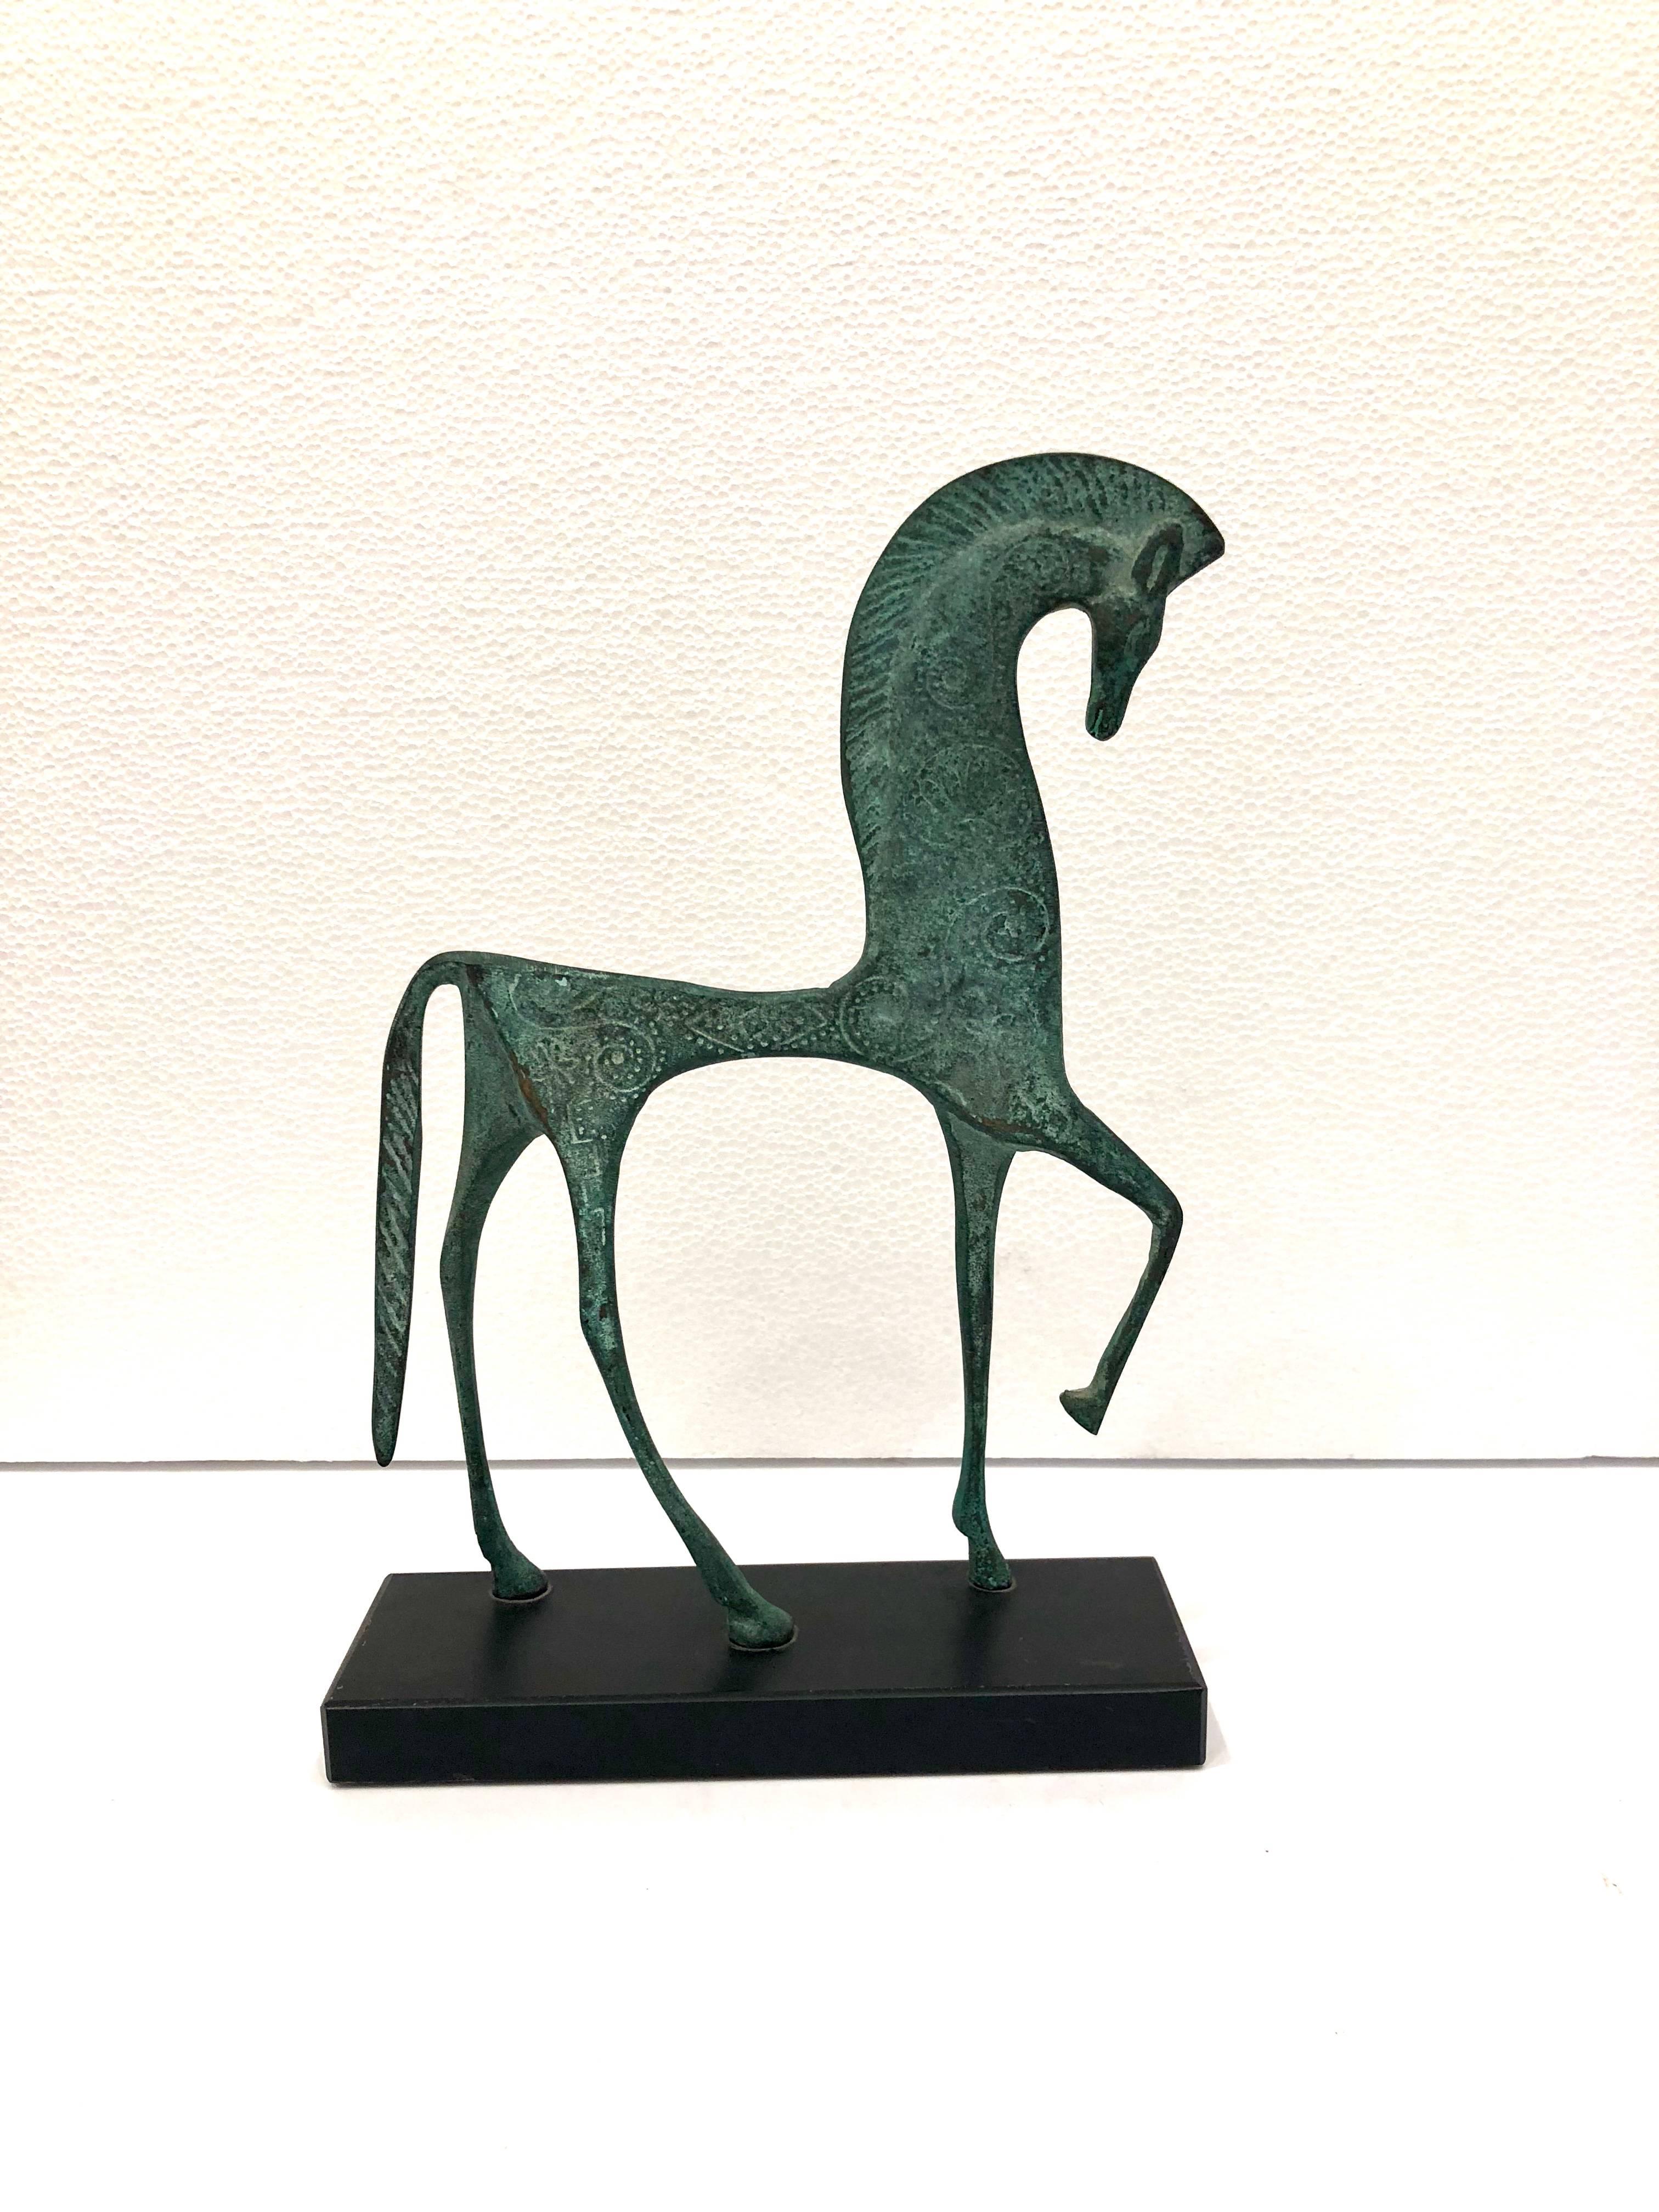 Simple elegant Etruscan horse sculpture by Francesco Simoncini, circa 1970s in a patinated bronze finish, sitting on a black slate base, made in Italy.